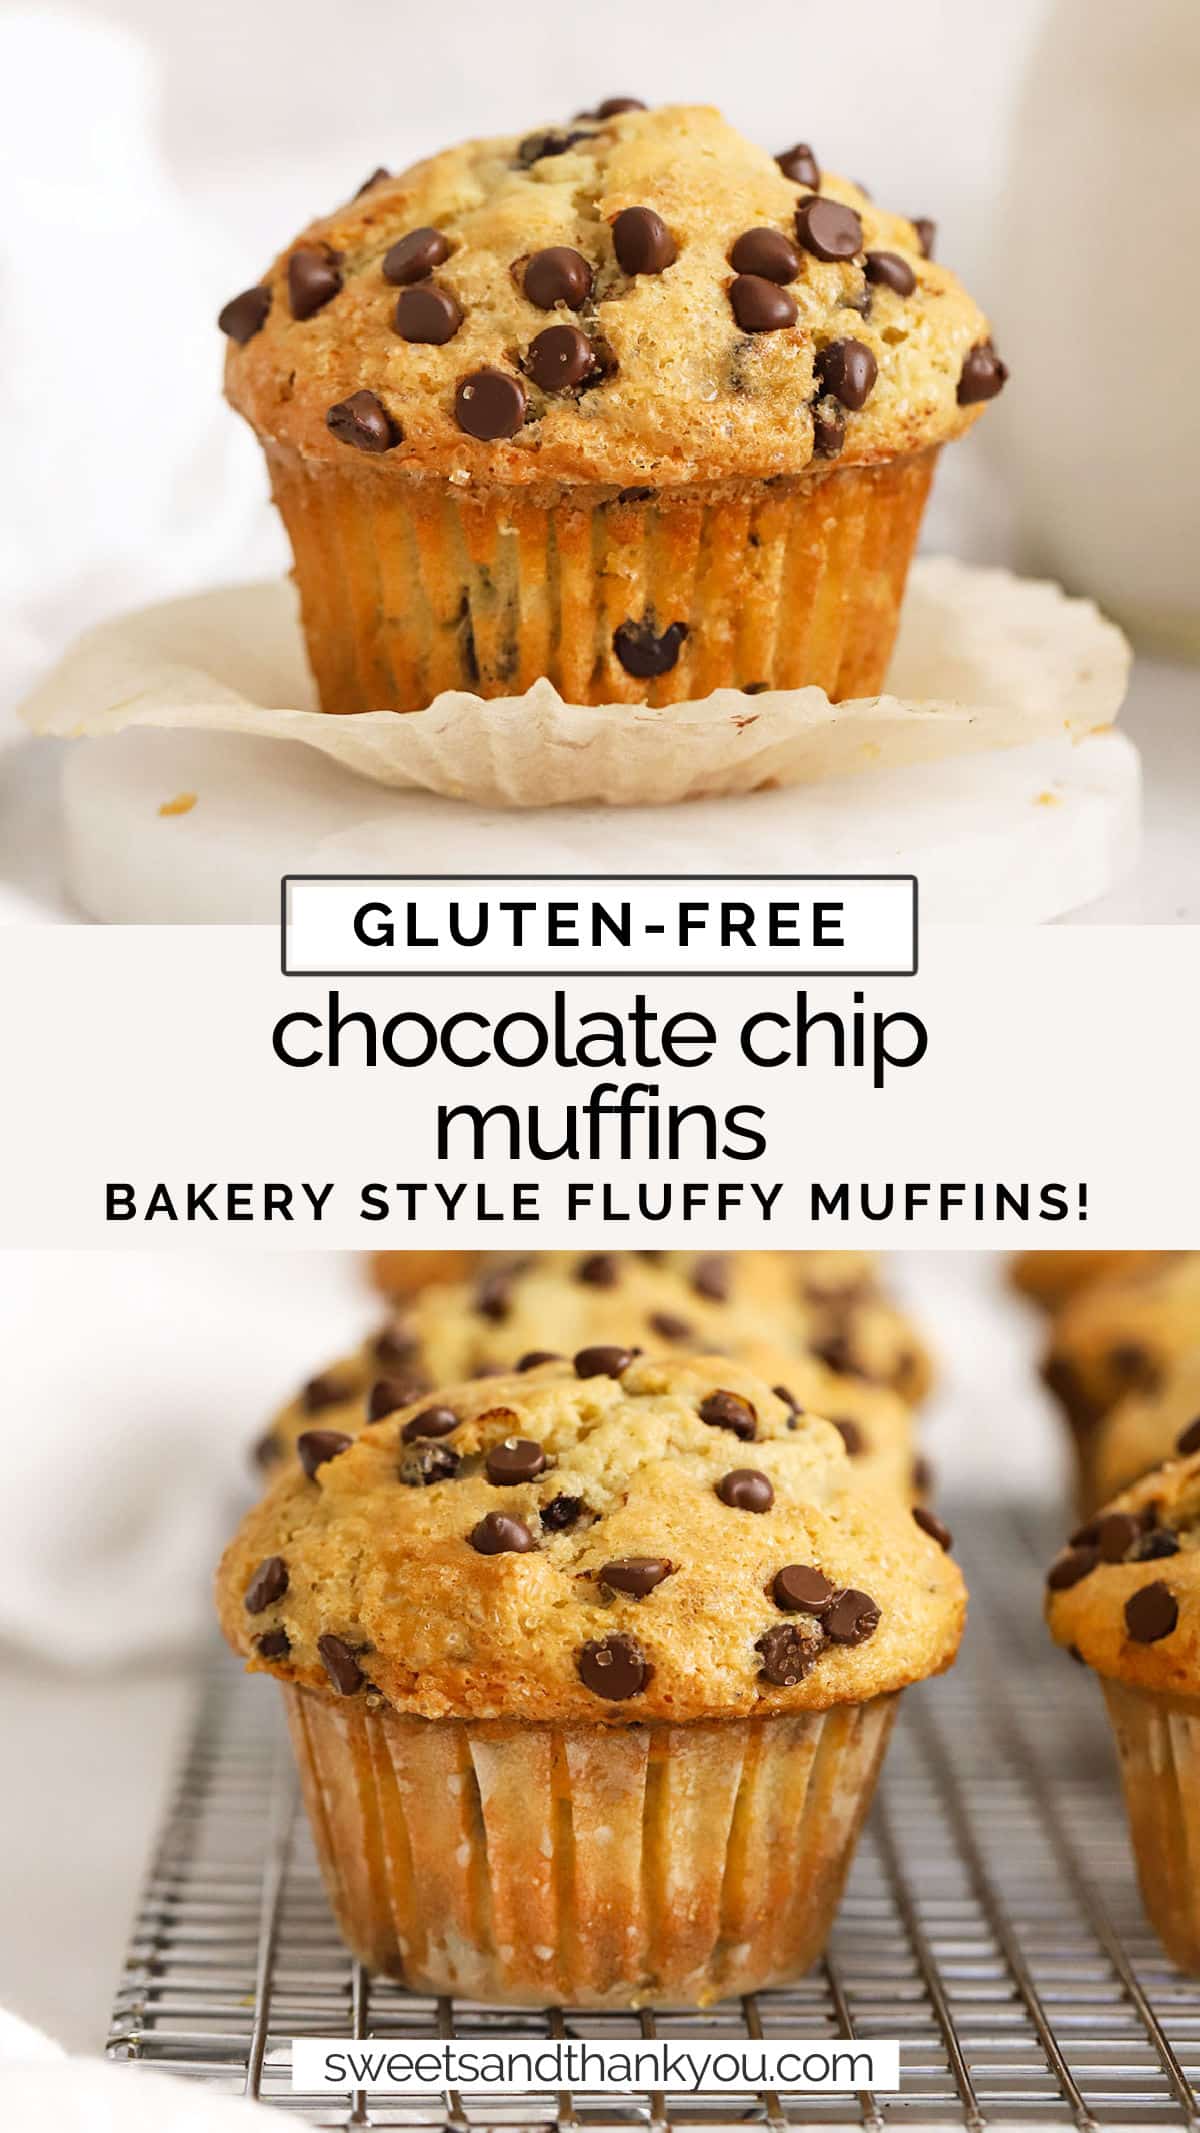 These bakery-style gluten-free chocolate chip muffins are light, fluffy, and packed with mini chocolate chips. They're a perfect brunch favorite! / gluten-free muffins recipe / gluten-free muffin recipe / gluten-free brunch / gluten-free breakfast / gluten-free chocolate chip muffin recipe / gluten-free bakery muffins / gluten-free bakery style muffins / easy gluten-free muffins / gluten-free muffins with chocolate chips /